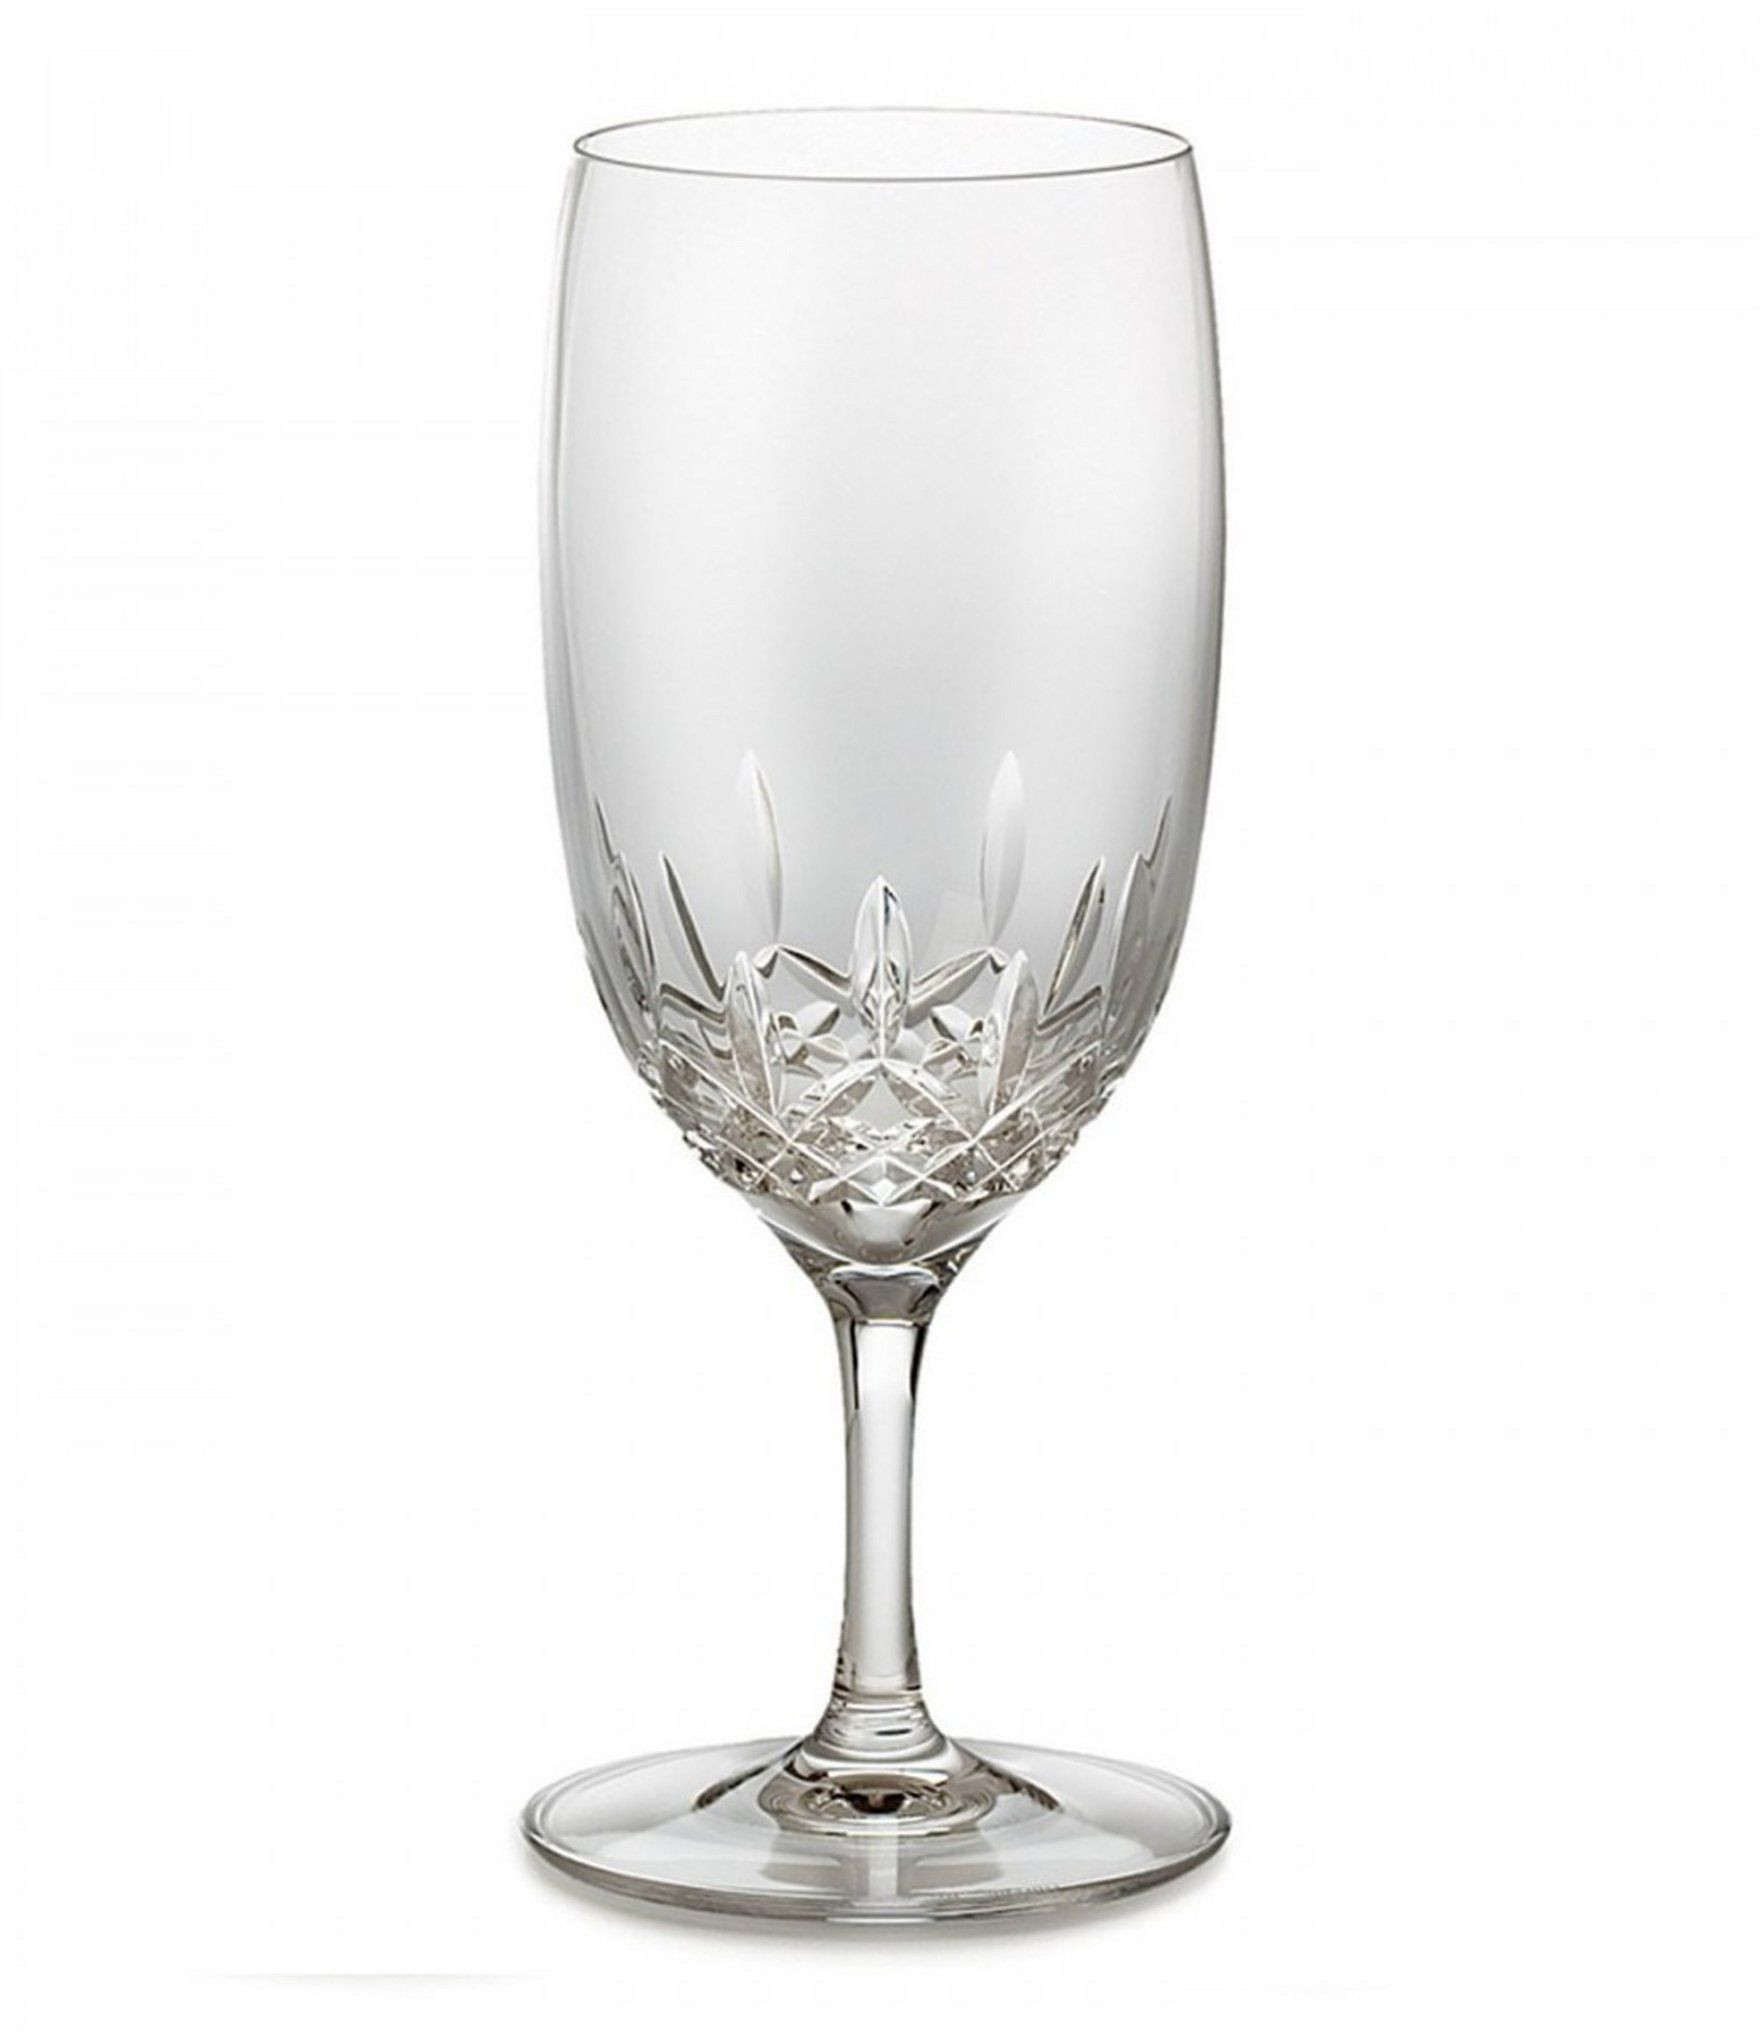 old waterford crystal vase of 21 waterford crystal vase marquis the weekly world within waterford lismore essence iced beverage glass